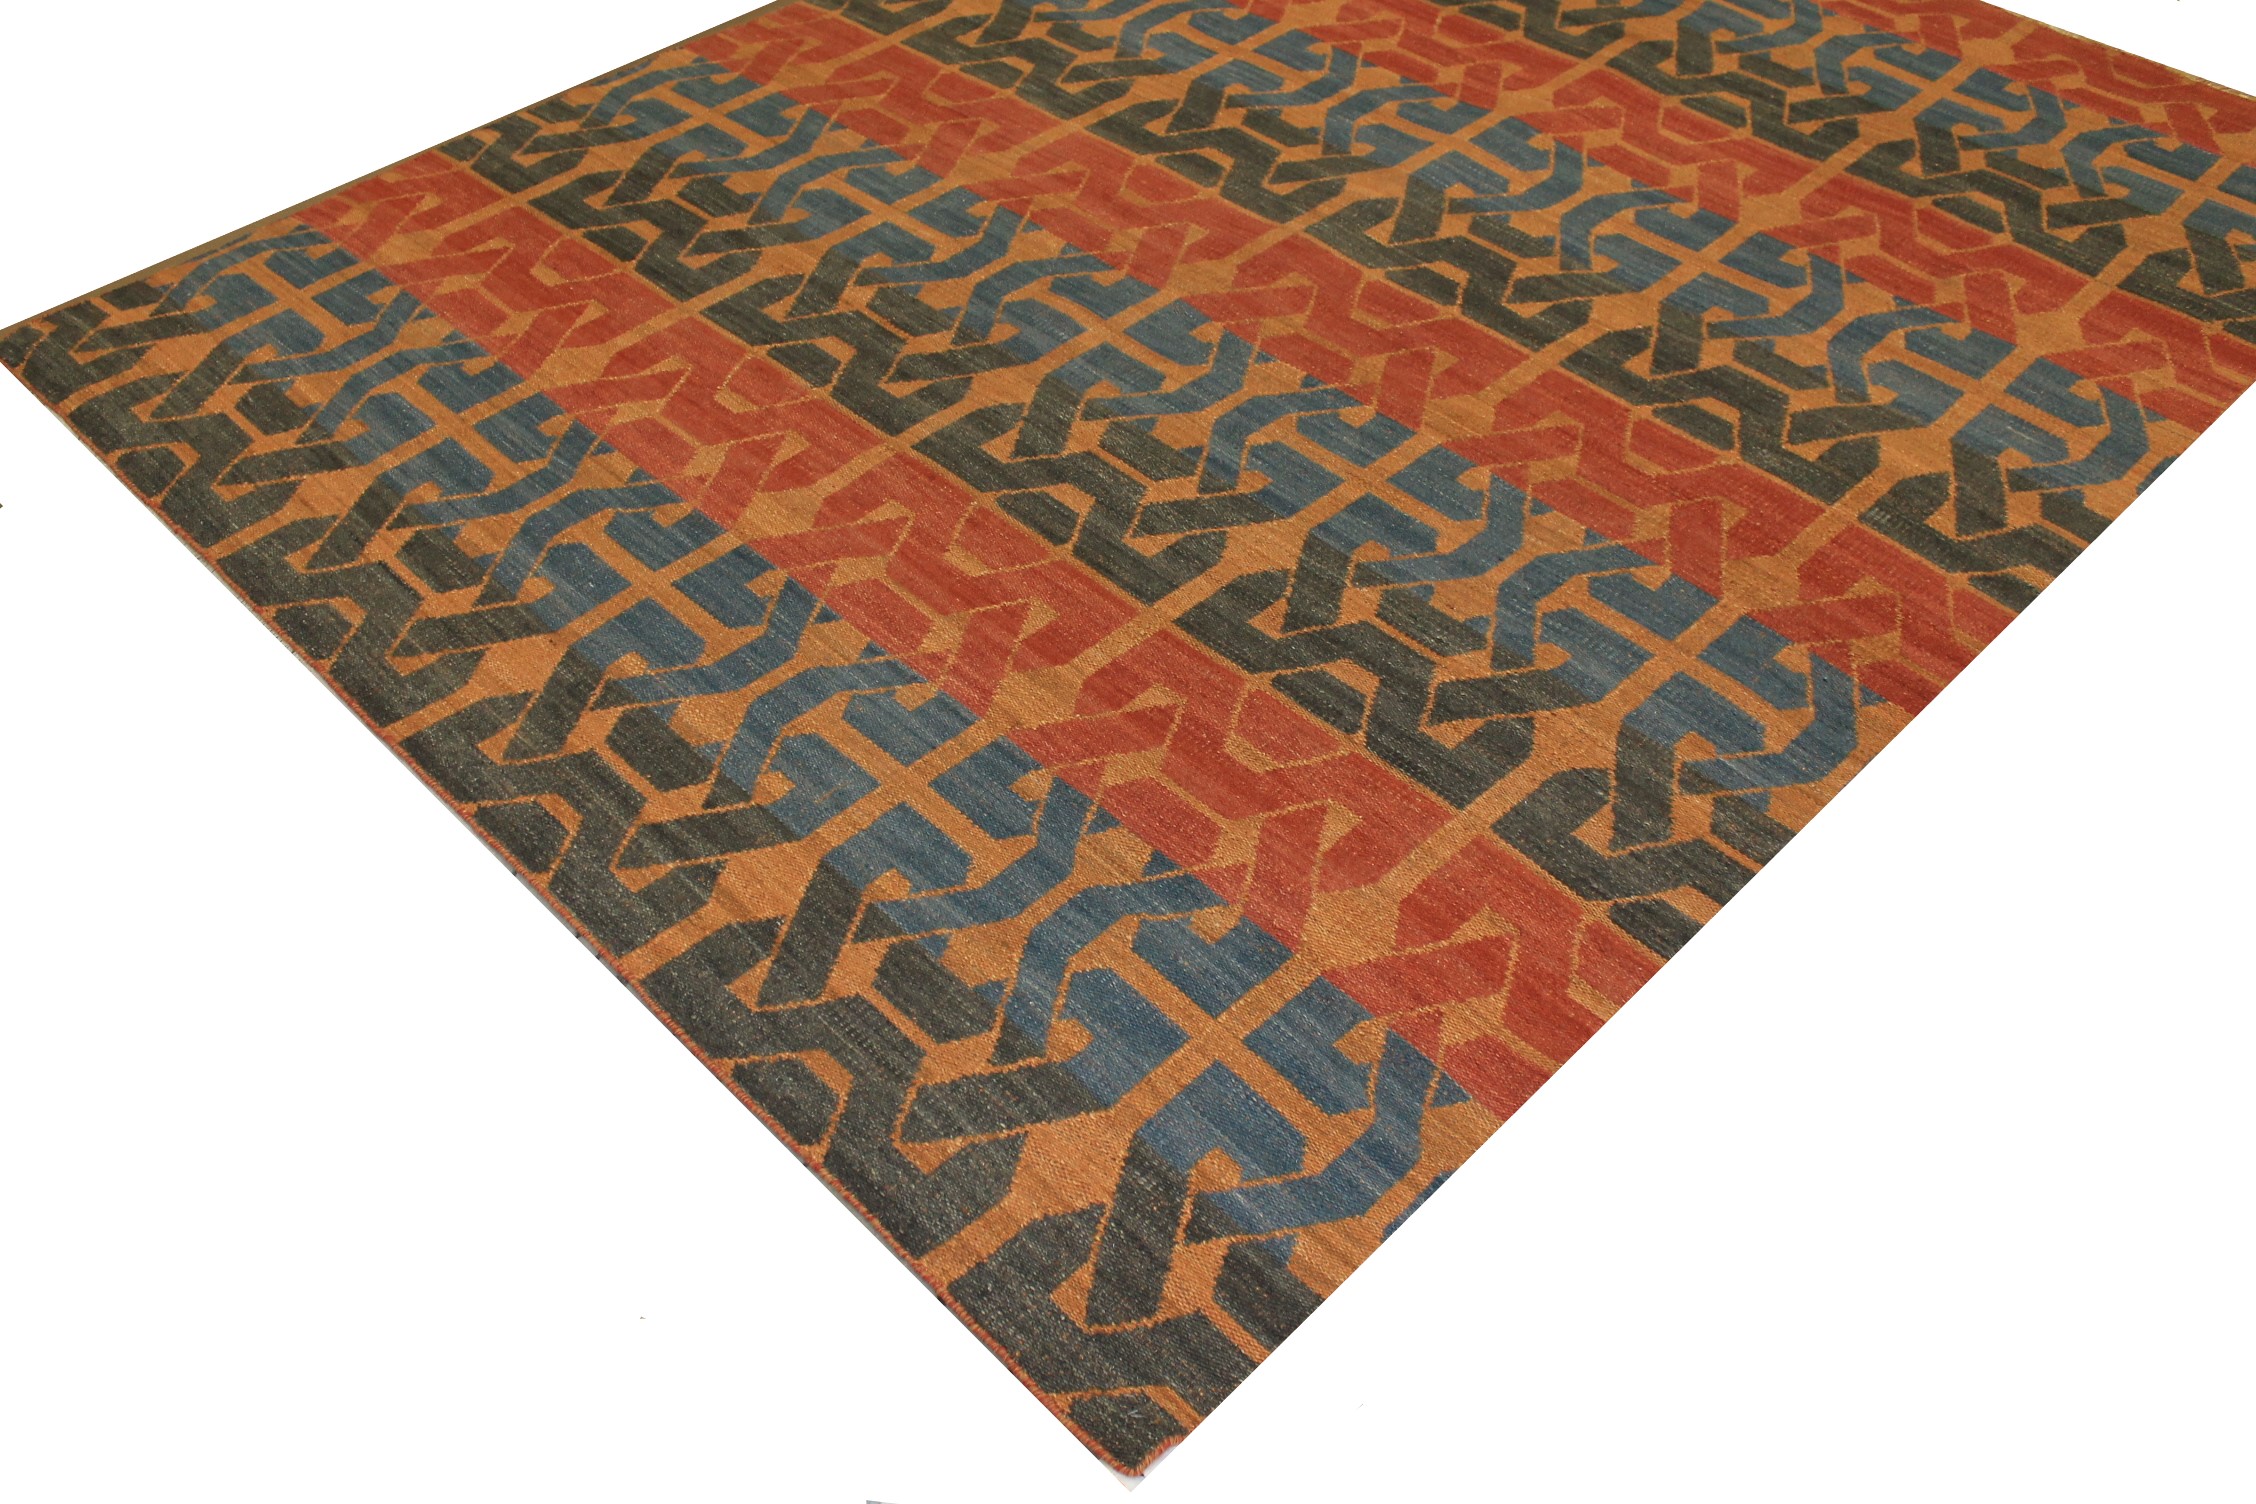 8x10 Flat Weave Hand Knotted Wool Area Rug - MR21025